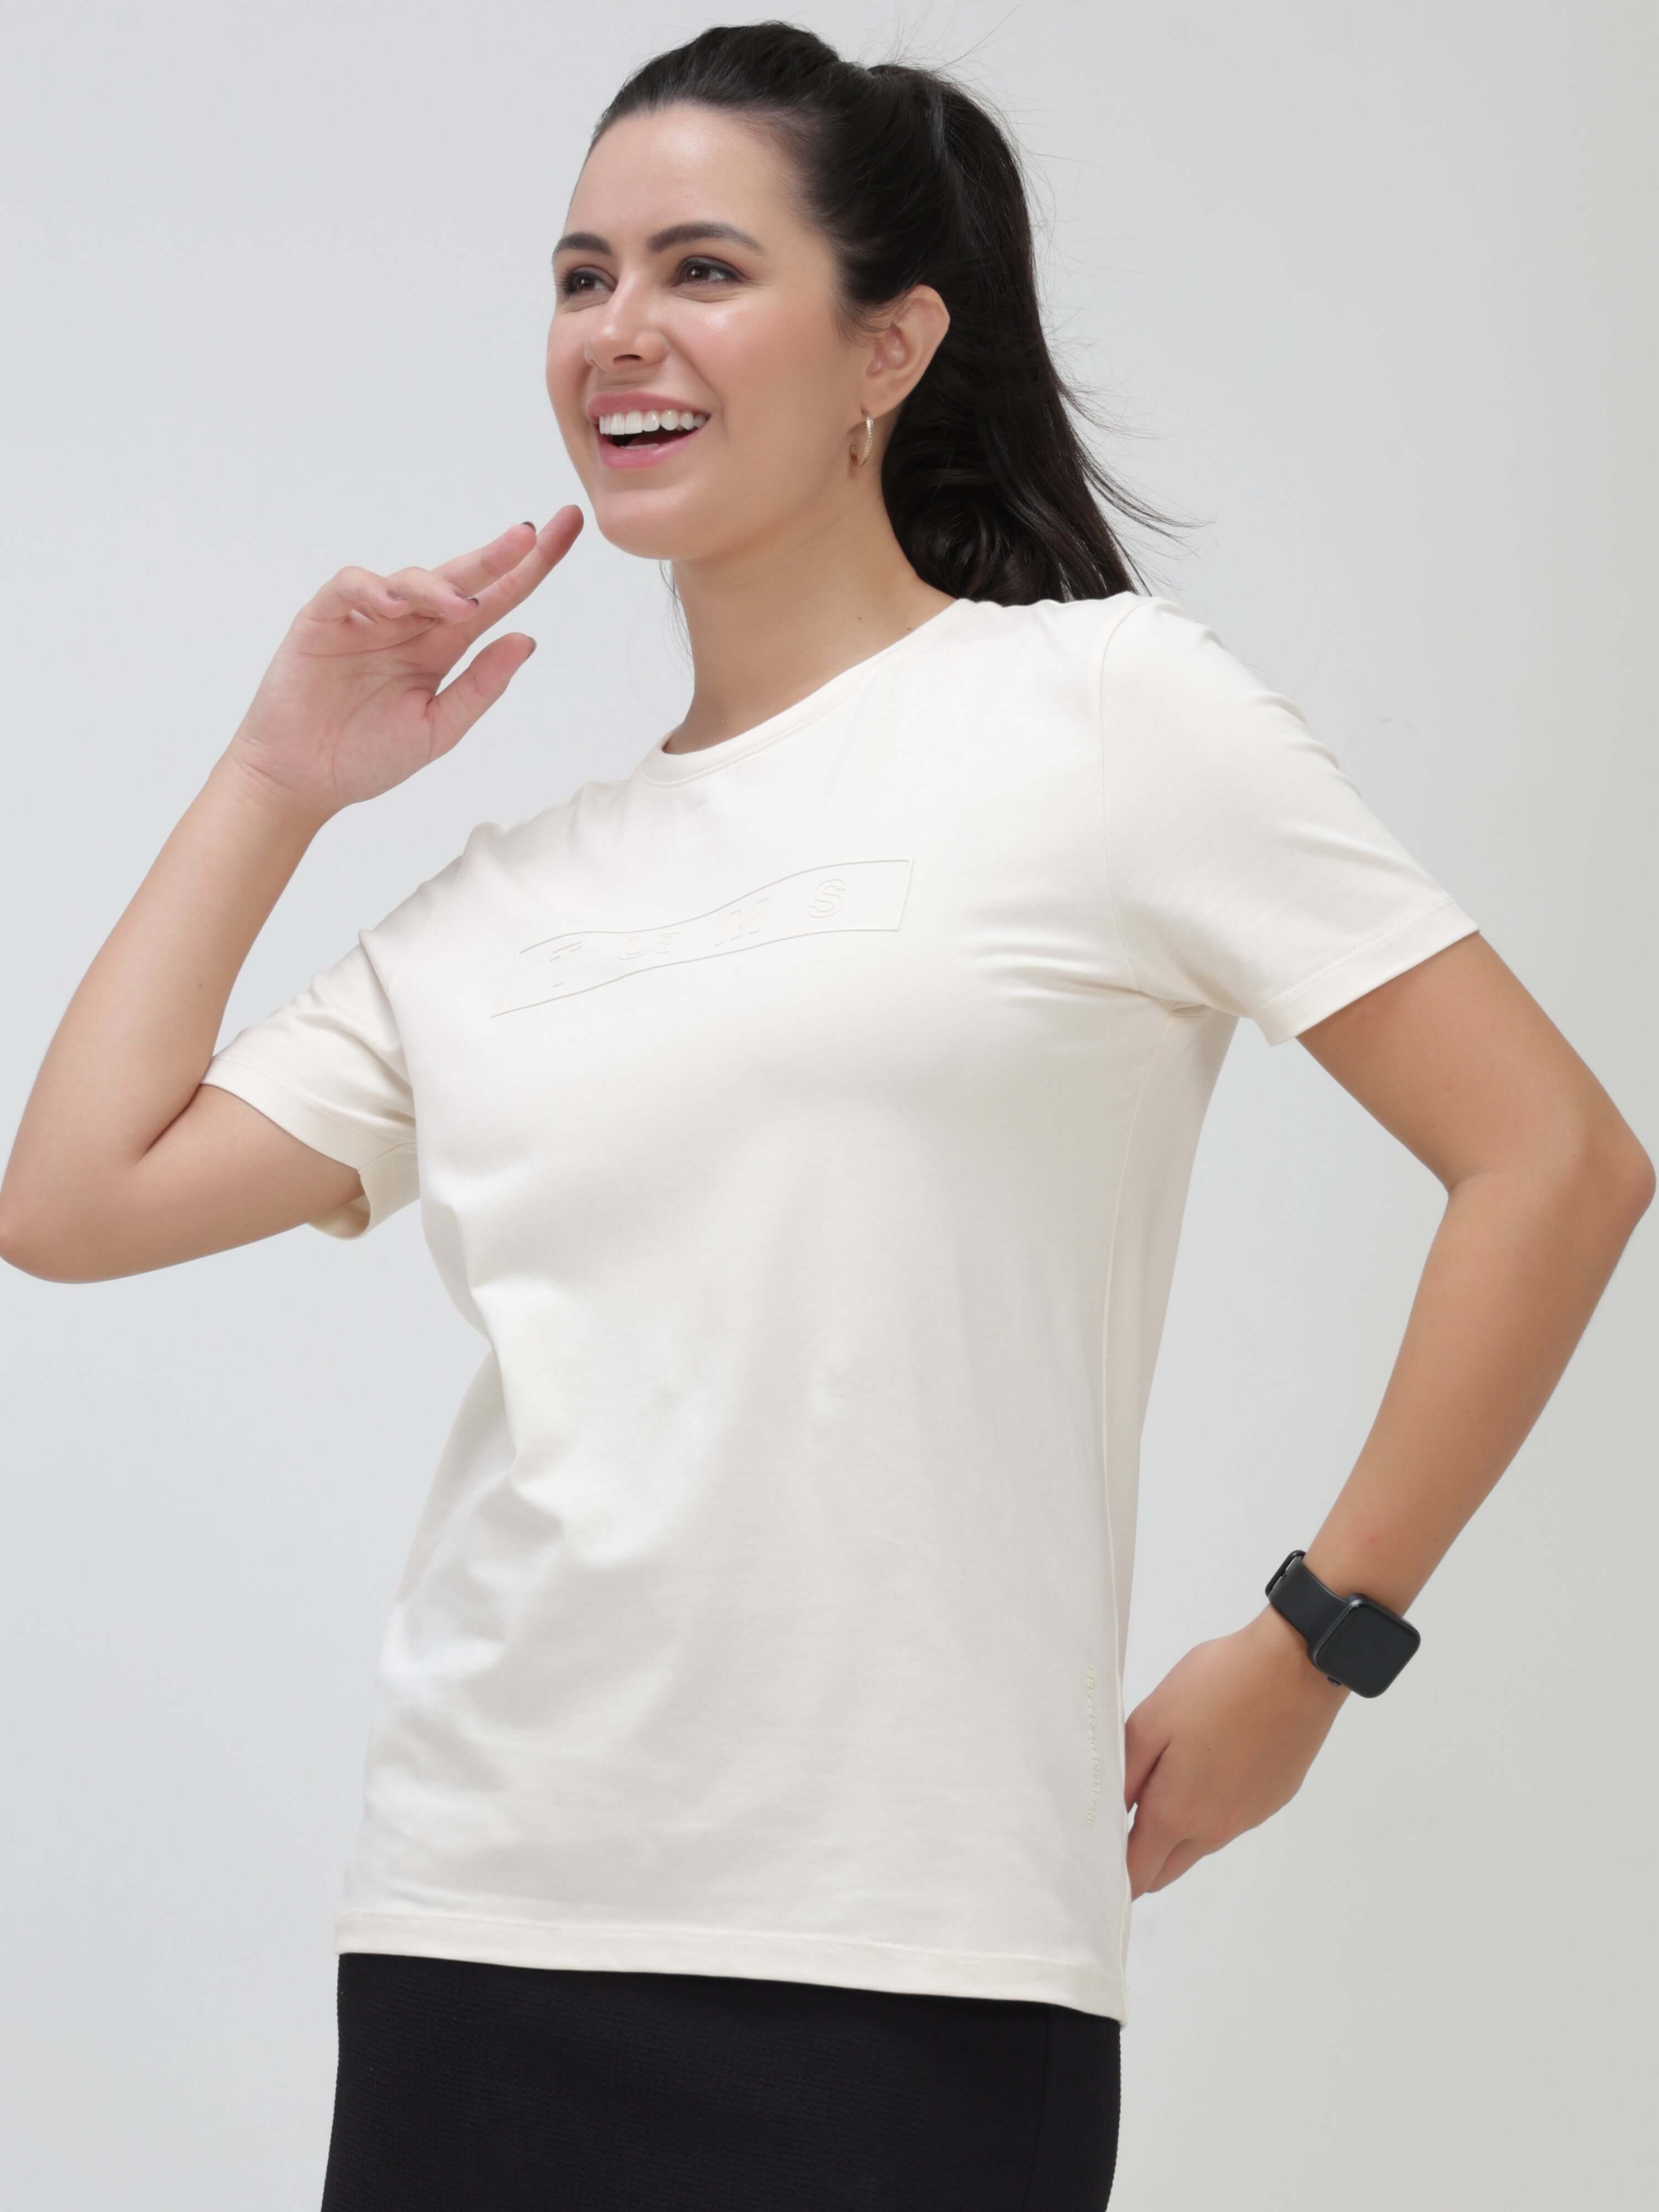 Soft Peach Stain-Proof & Odor-Resistant Turms T-shirtCrew Neck UnisexRs. 999.00